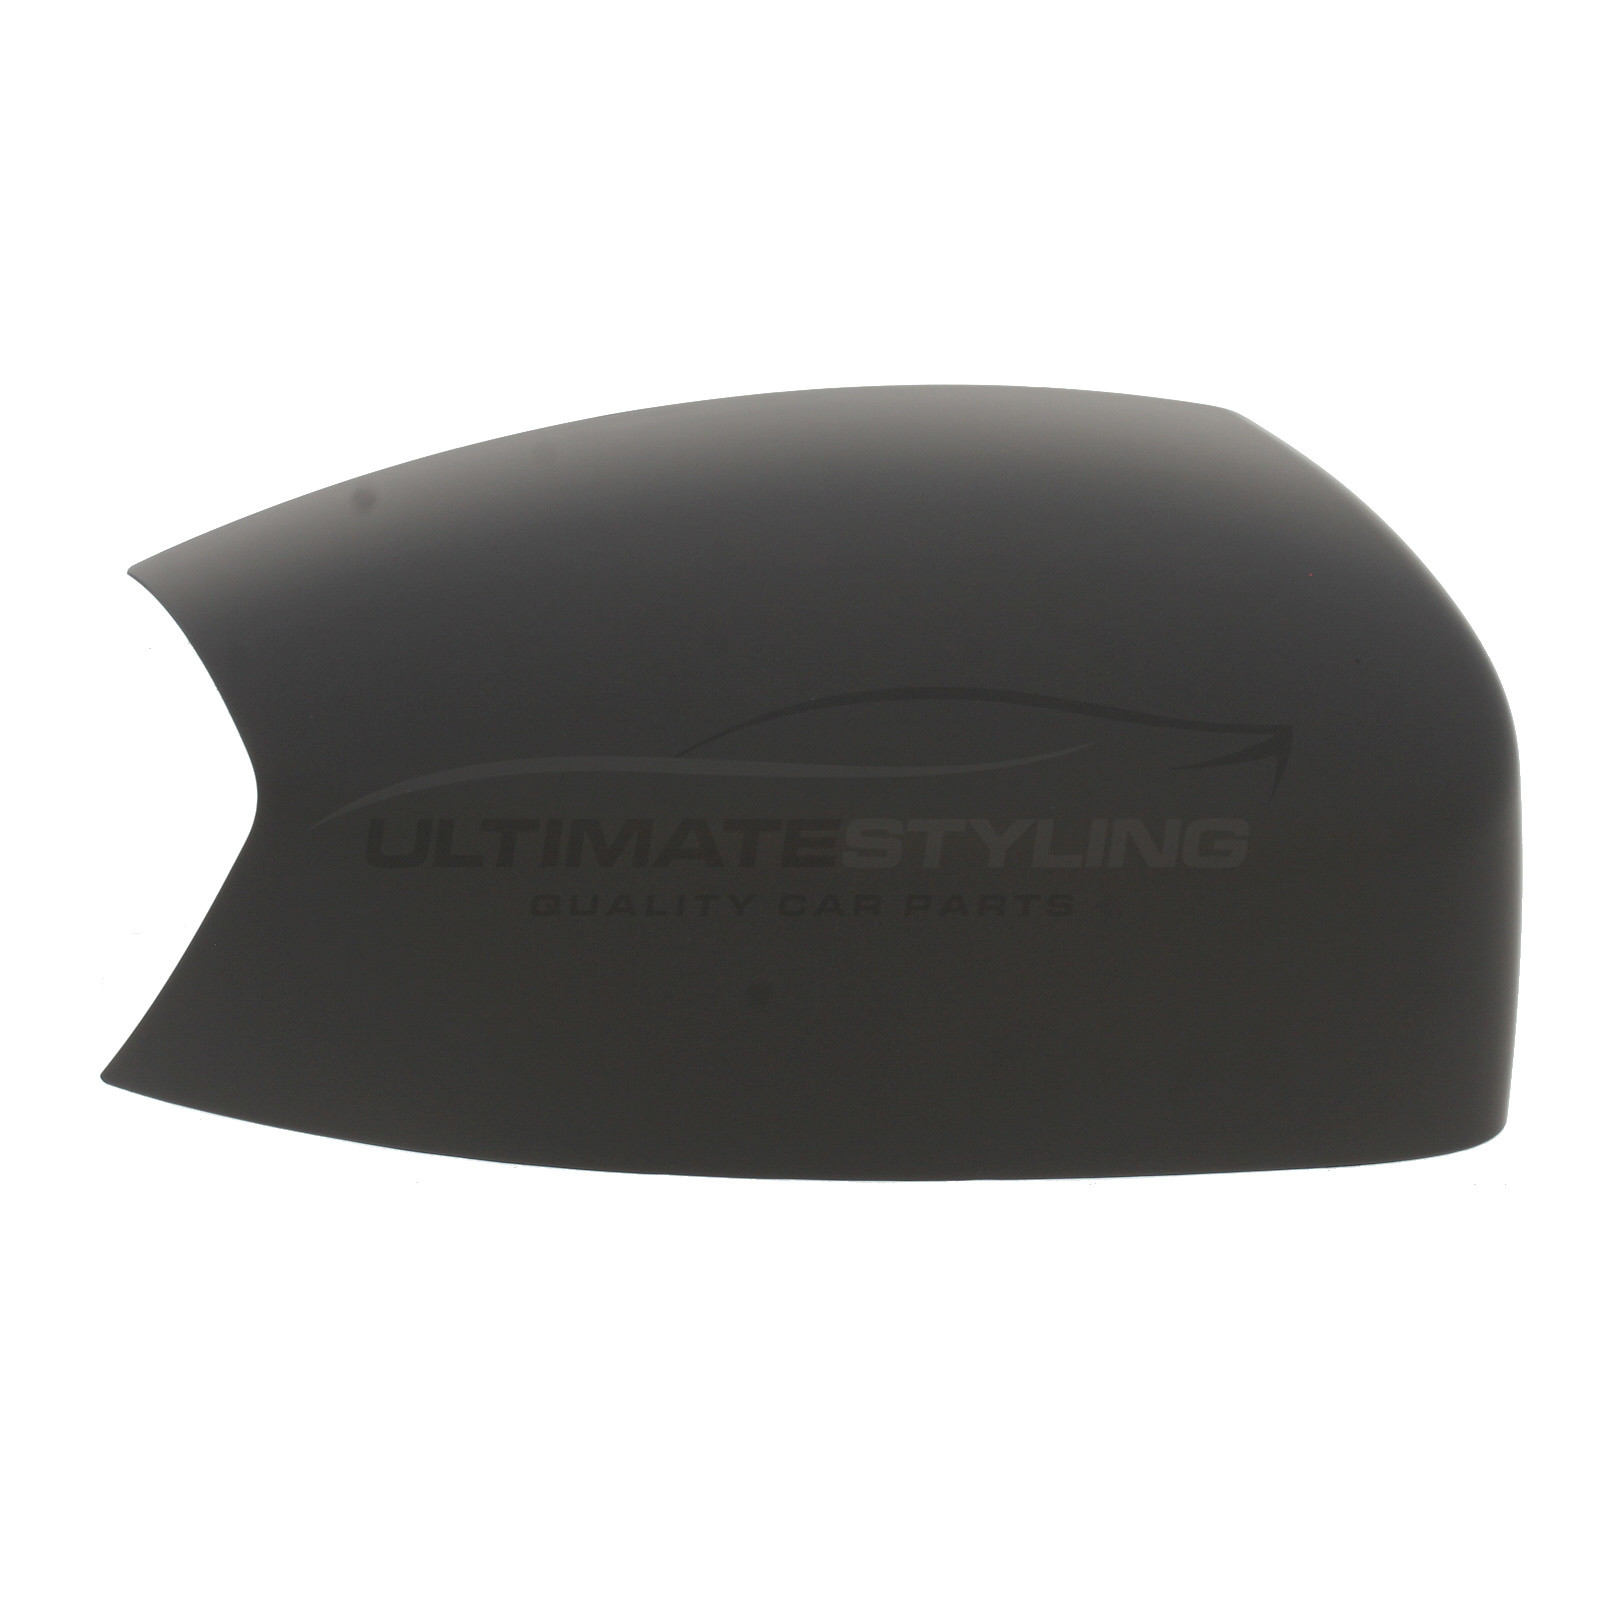 Ford C-MAX 2010-2019, Ford Galaxy 2006-2016, Ford Kuga 2008-2013, Ford S-MAX 2006-2016 Wing Mirror Cover Cap Casing Primed Drivers Side (RH)